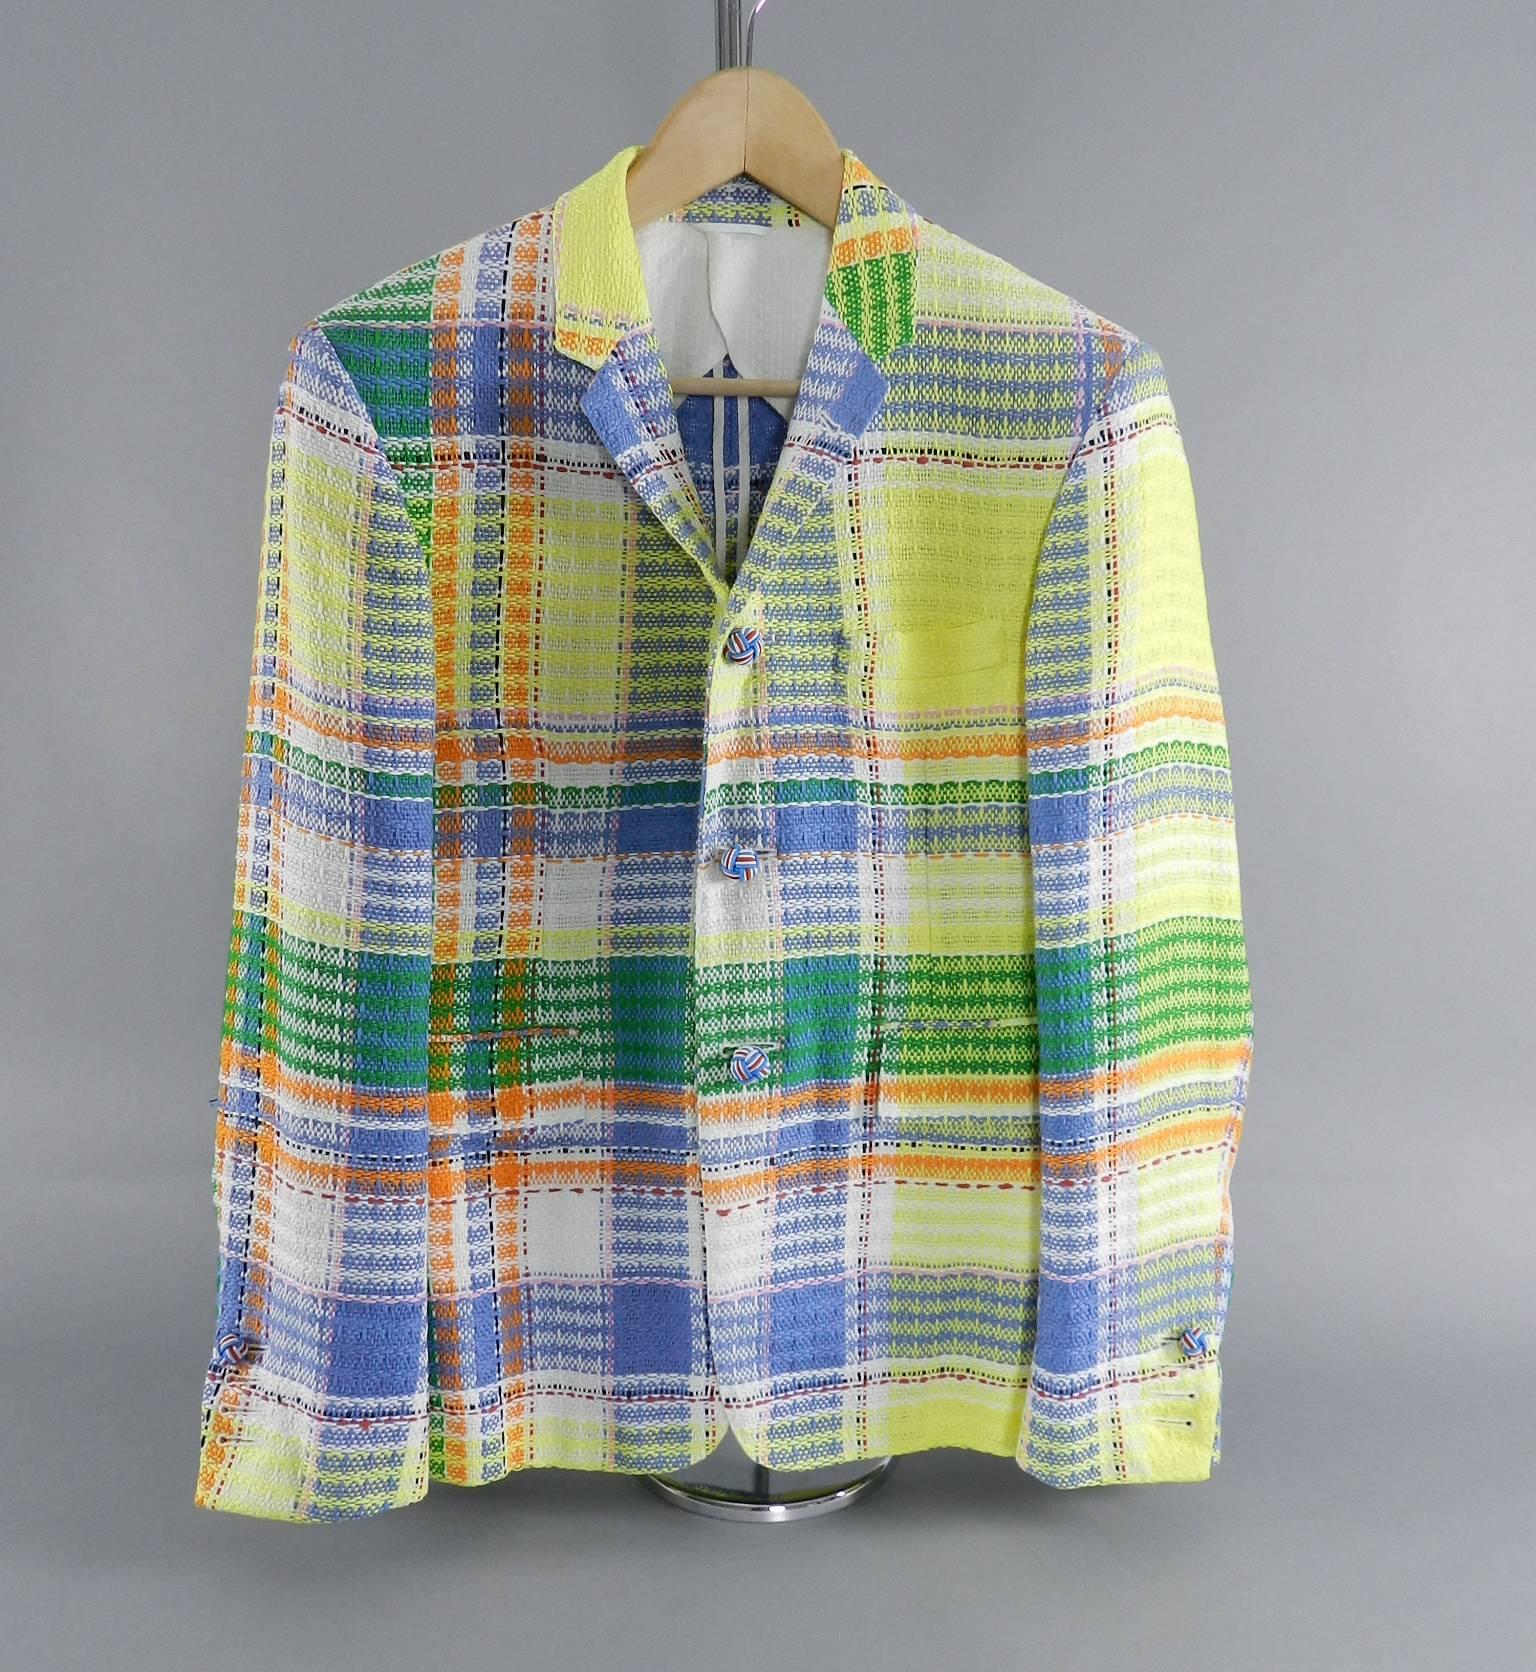 THOM BROWNE Spring 2013 Runway Yellow and Blue Madras Cotton Blazer / Jacket.  Excellent pre-owned - Clean interior and exterior. Only worn once. Jacket fastens down front with 3 knotted buttons Can be worn with only 2 fastened and top undone if you